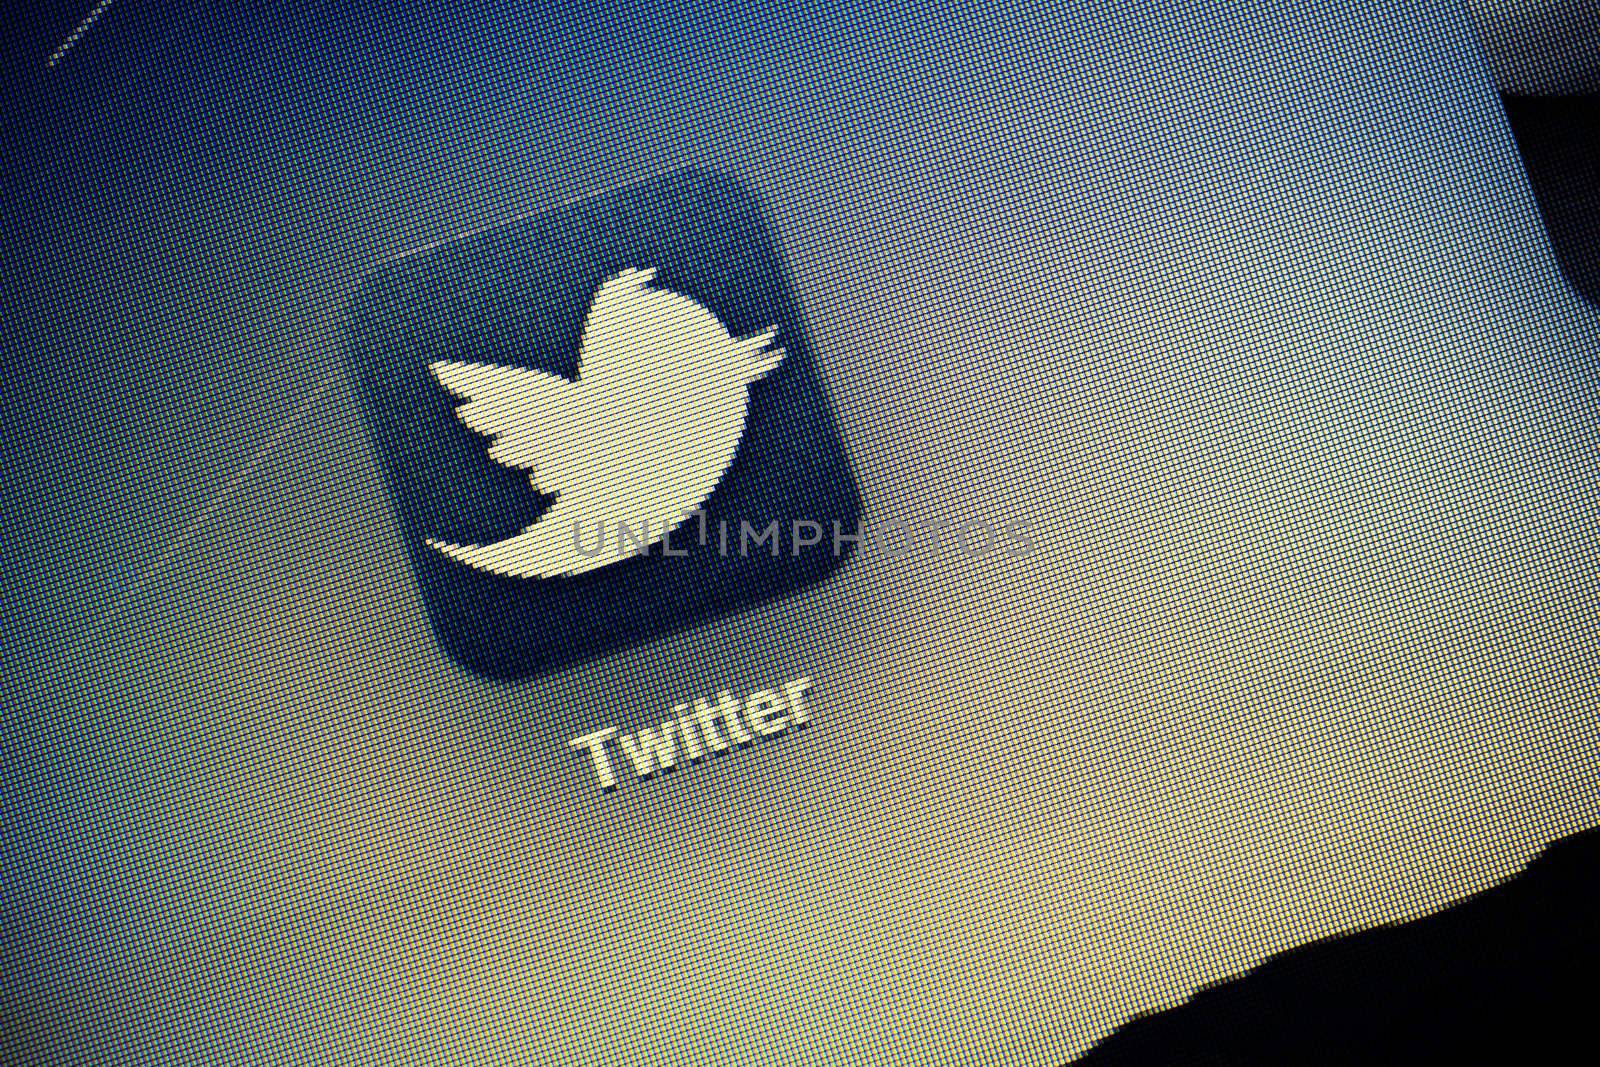 Kiev, Ukraine - October 15, 2011: Macro shot of Twitter logo on the screen of Apple Ipad2. Twitter is one of the most used social networks to exchange short messages.